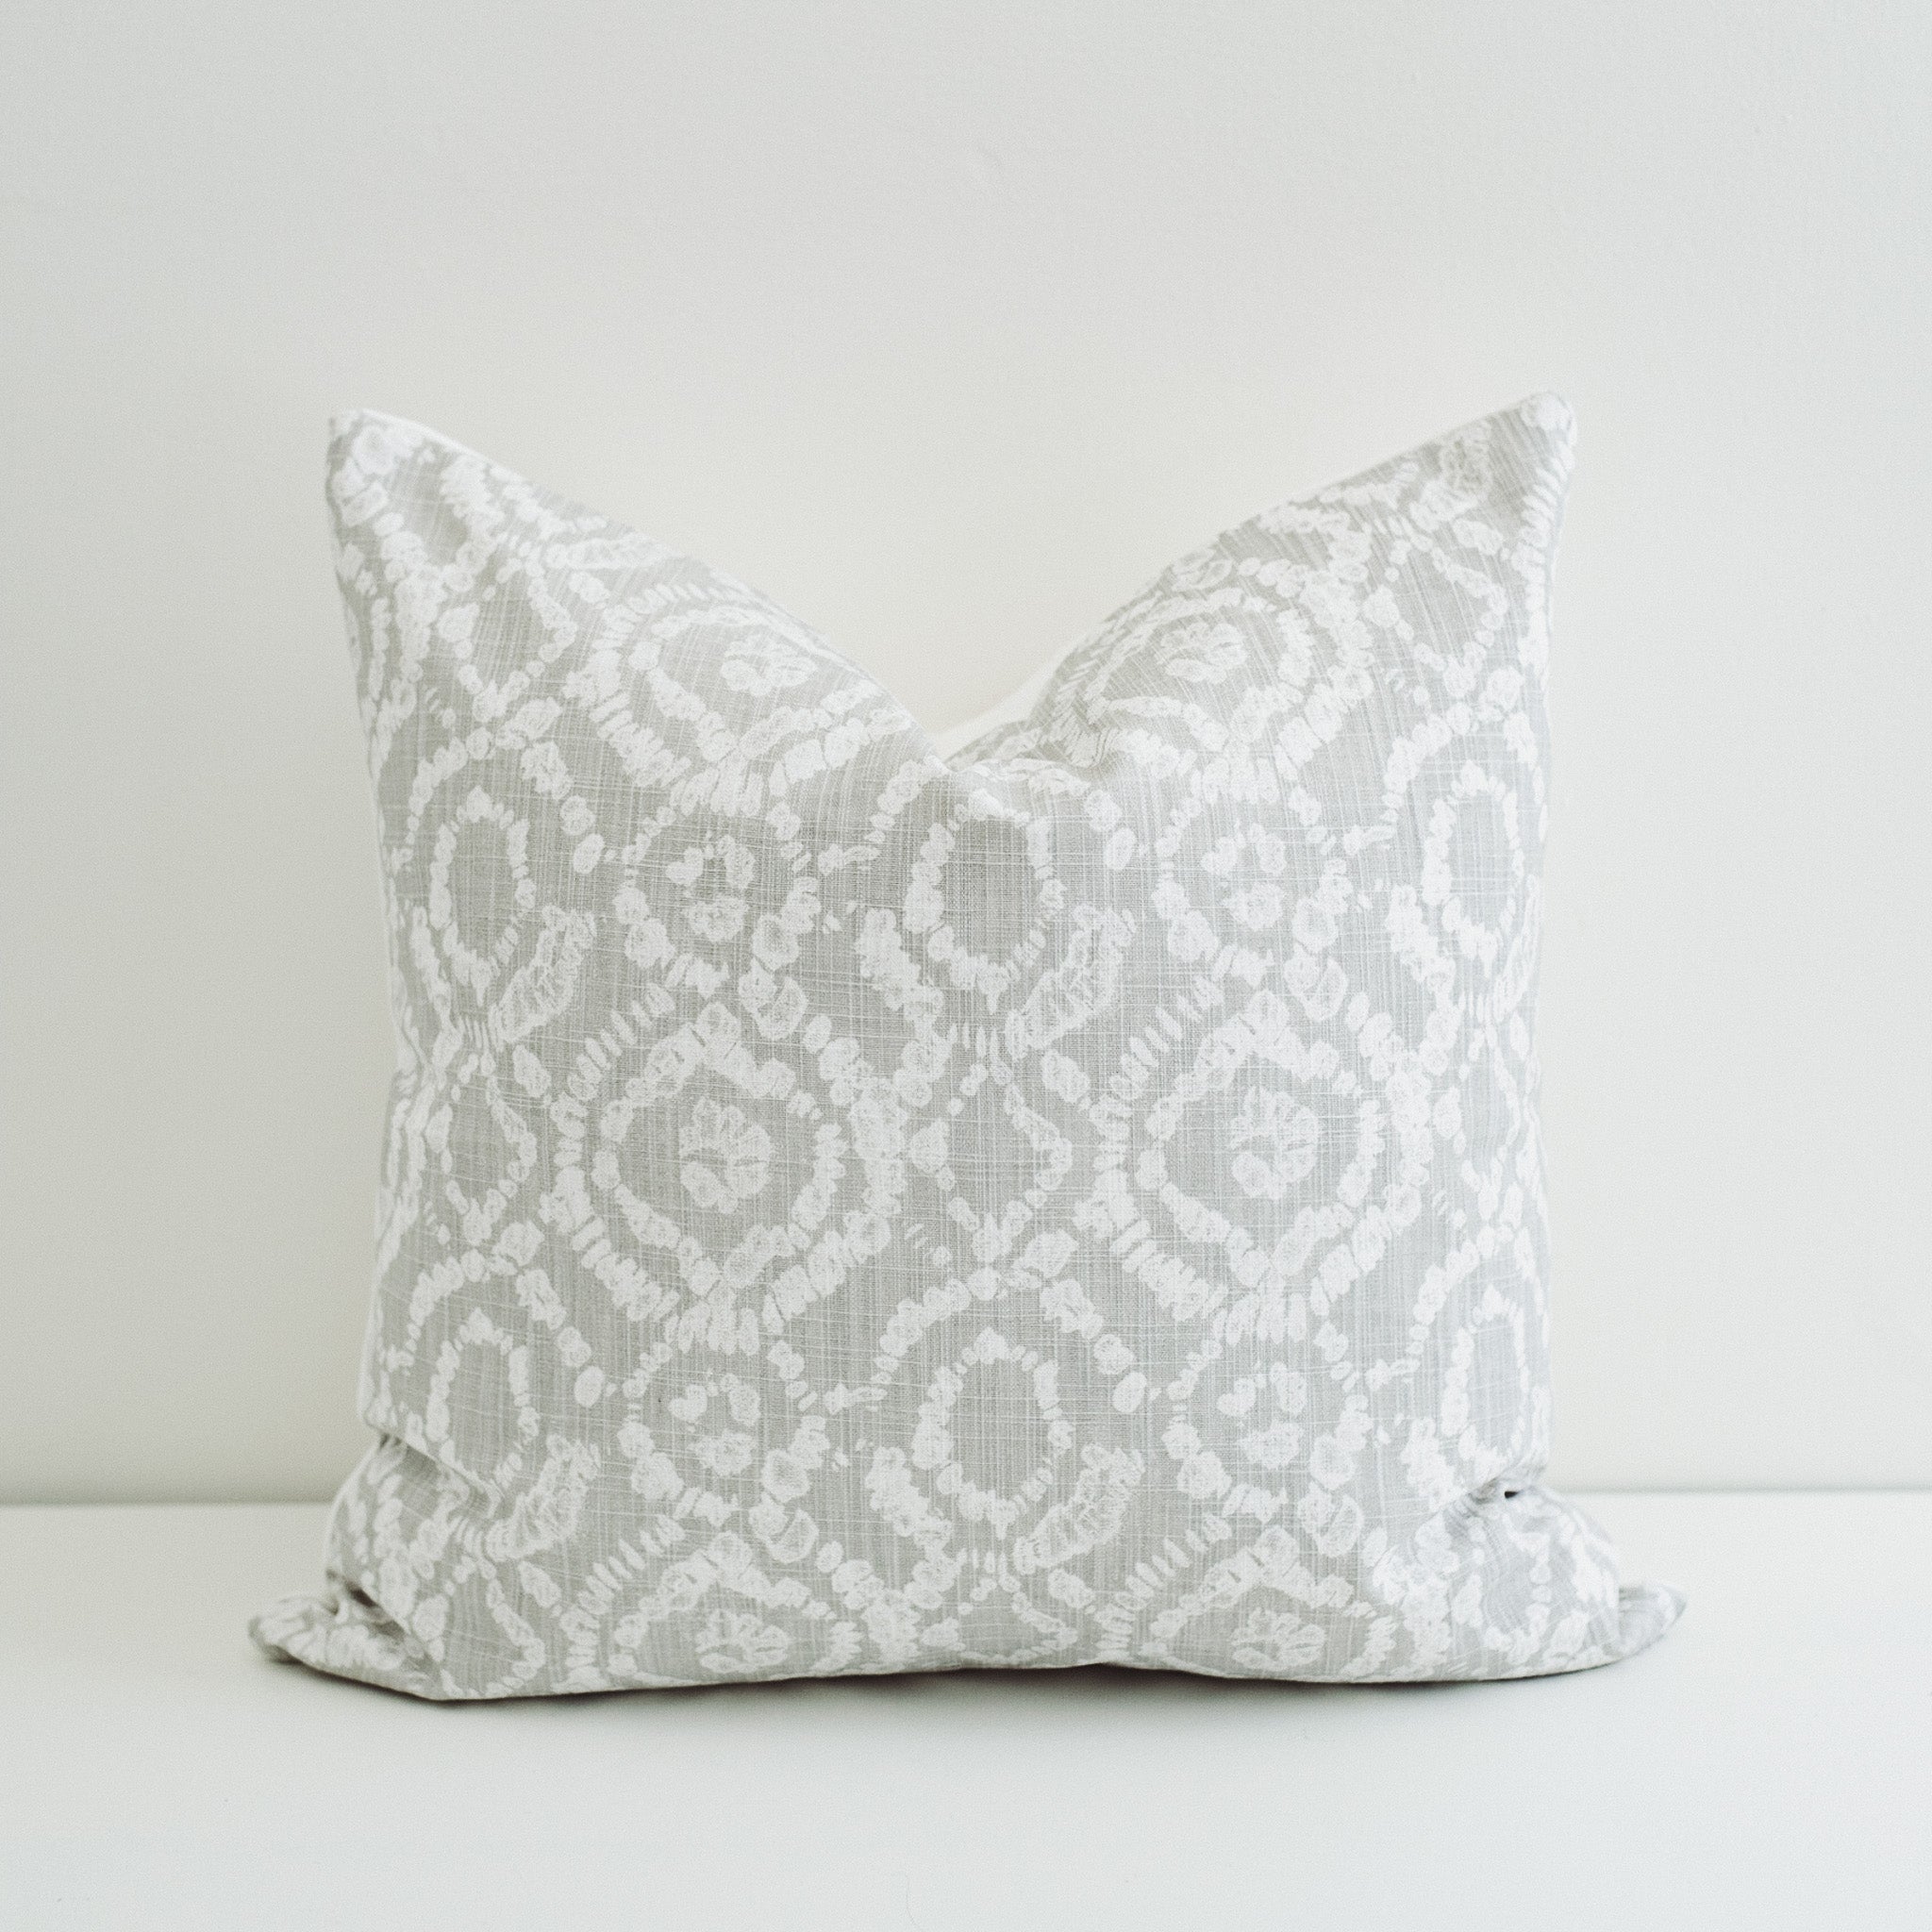 White and grey floral pillow. Artisan made Pillow Cover.